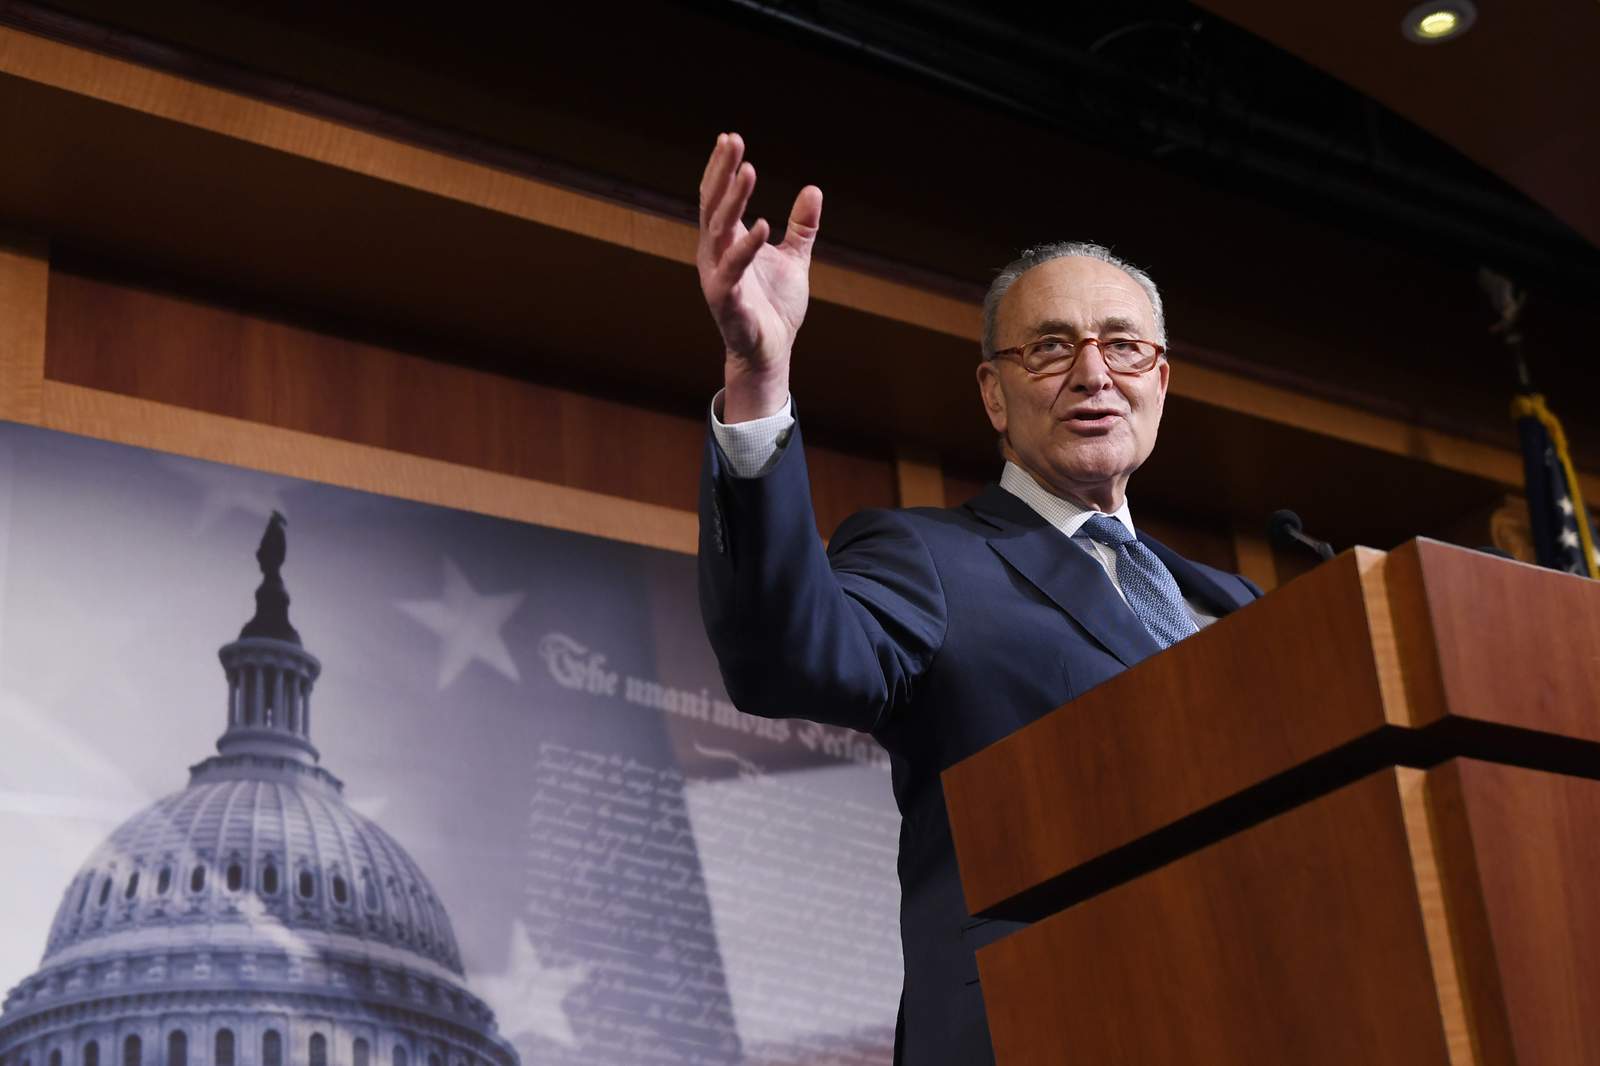 Schumer wants to protect whistleblowers amid Trump payback